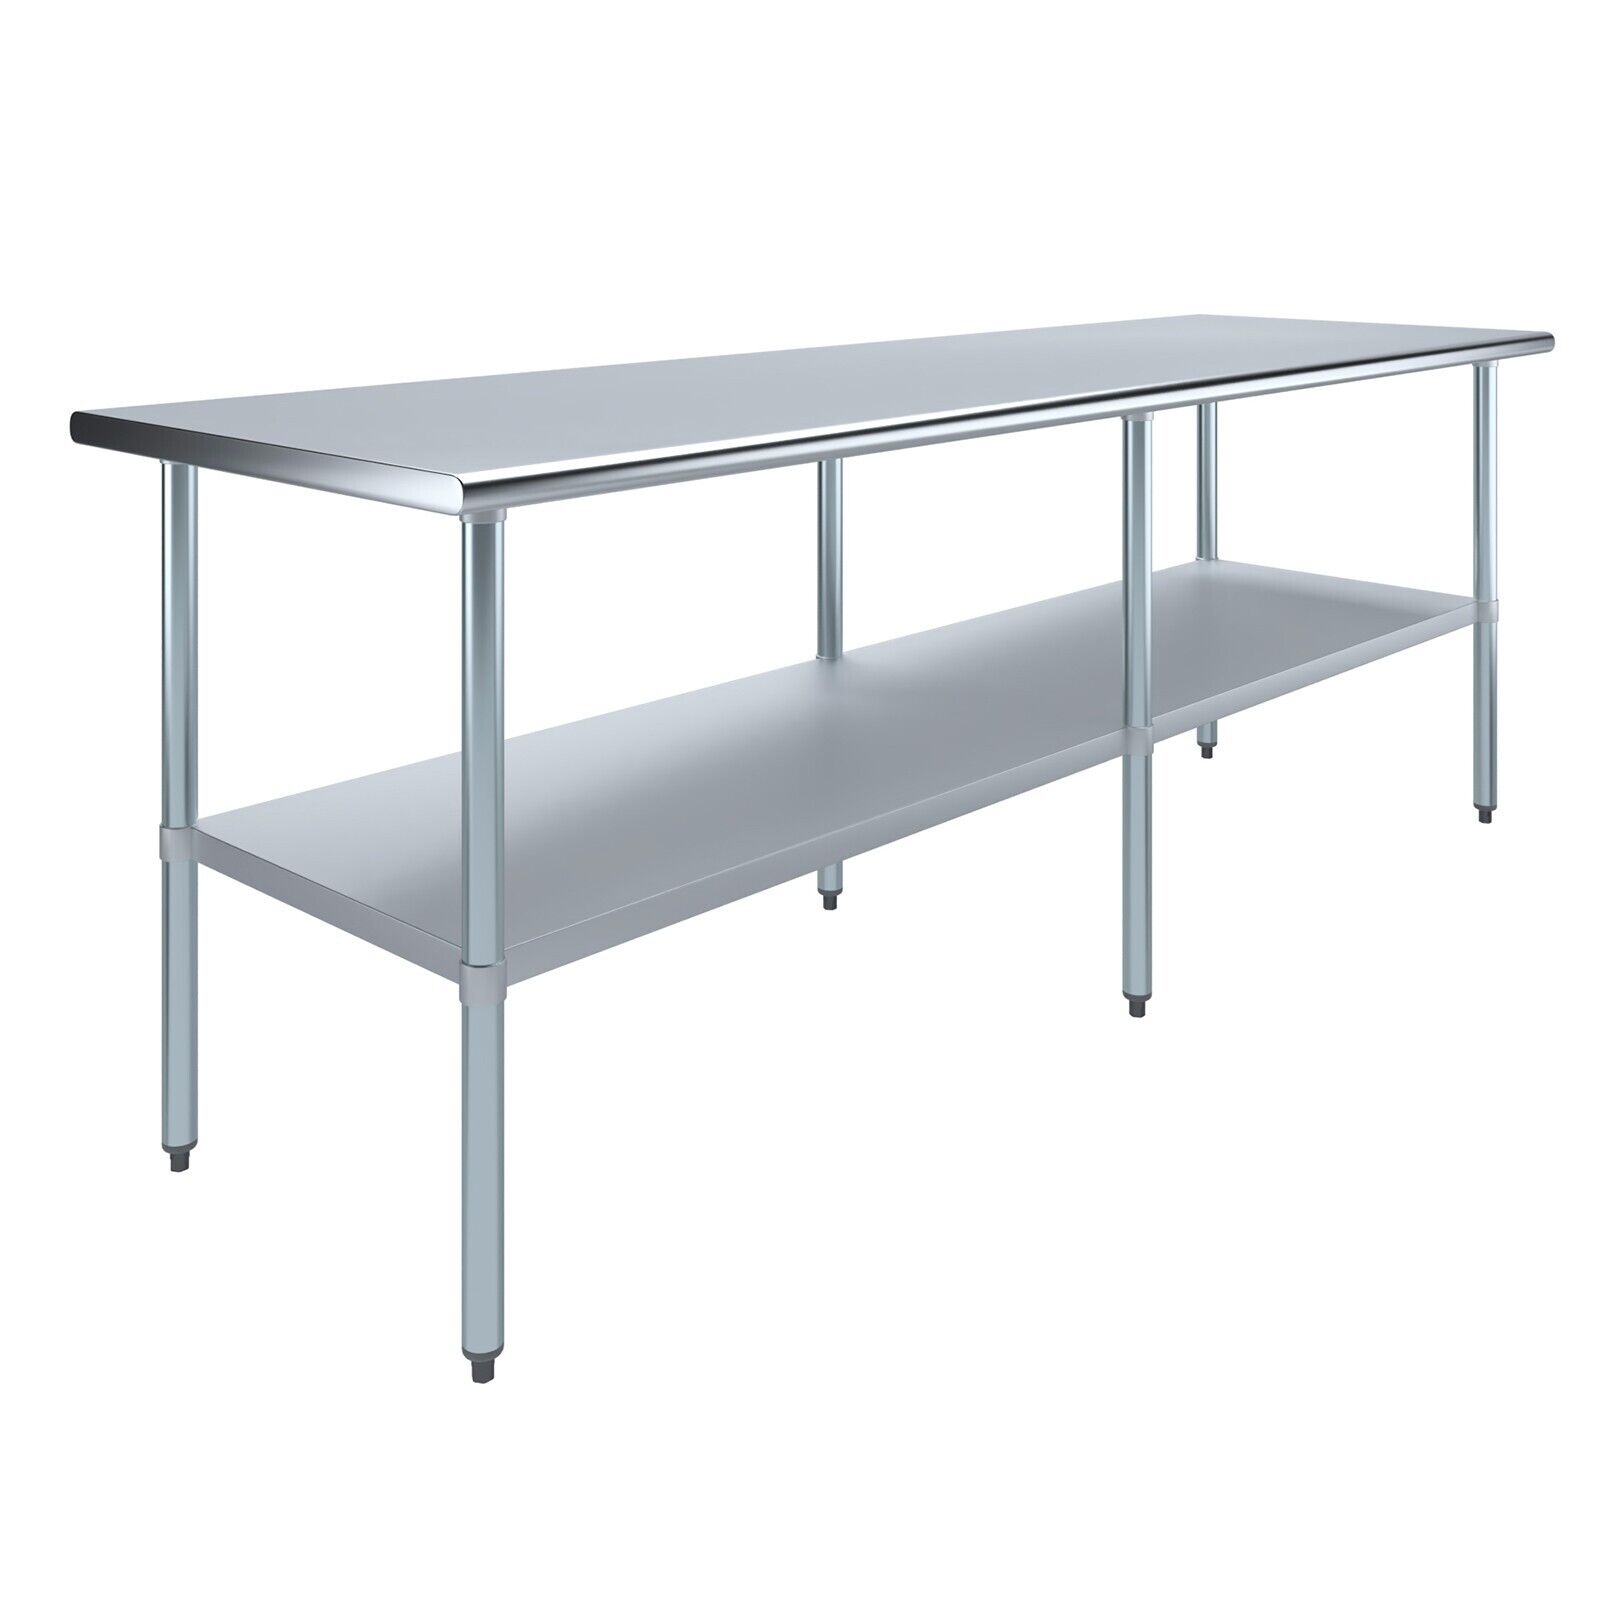 30 in. x 96 in. Stainless Steel  Table